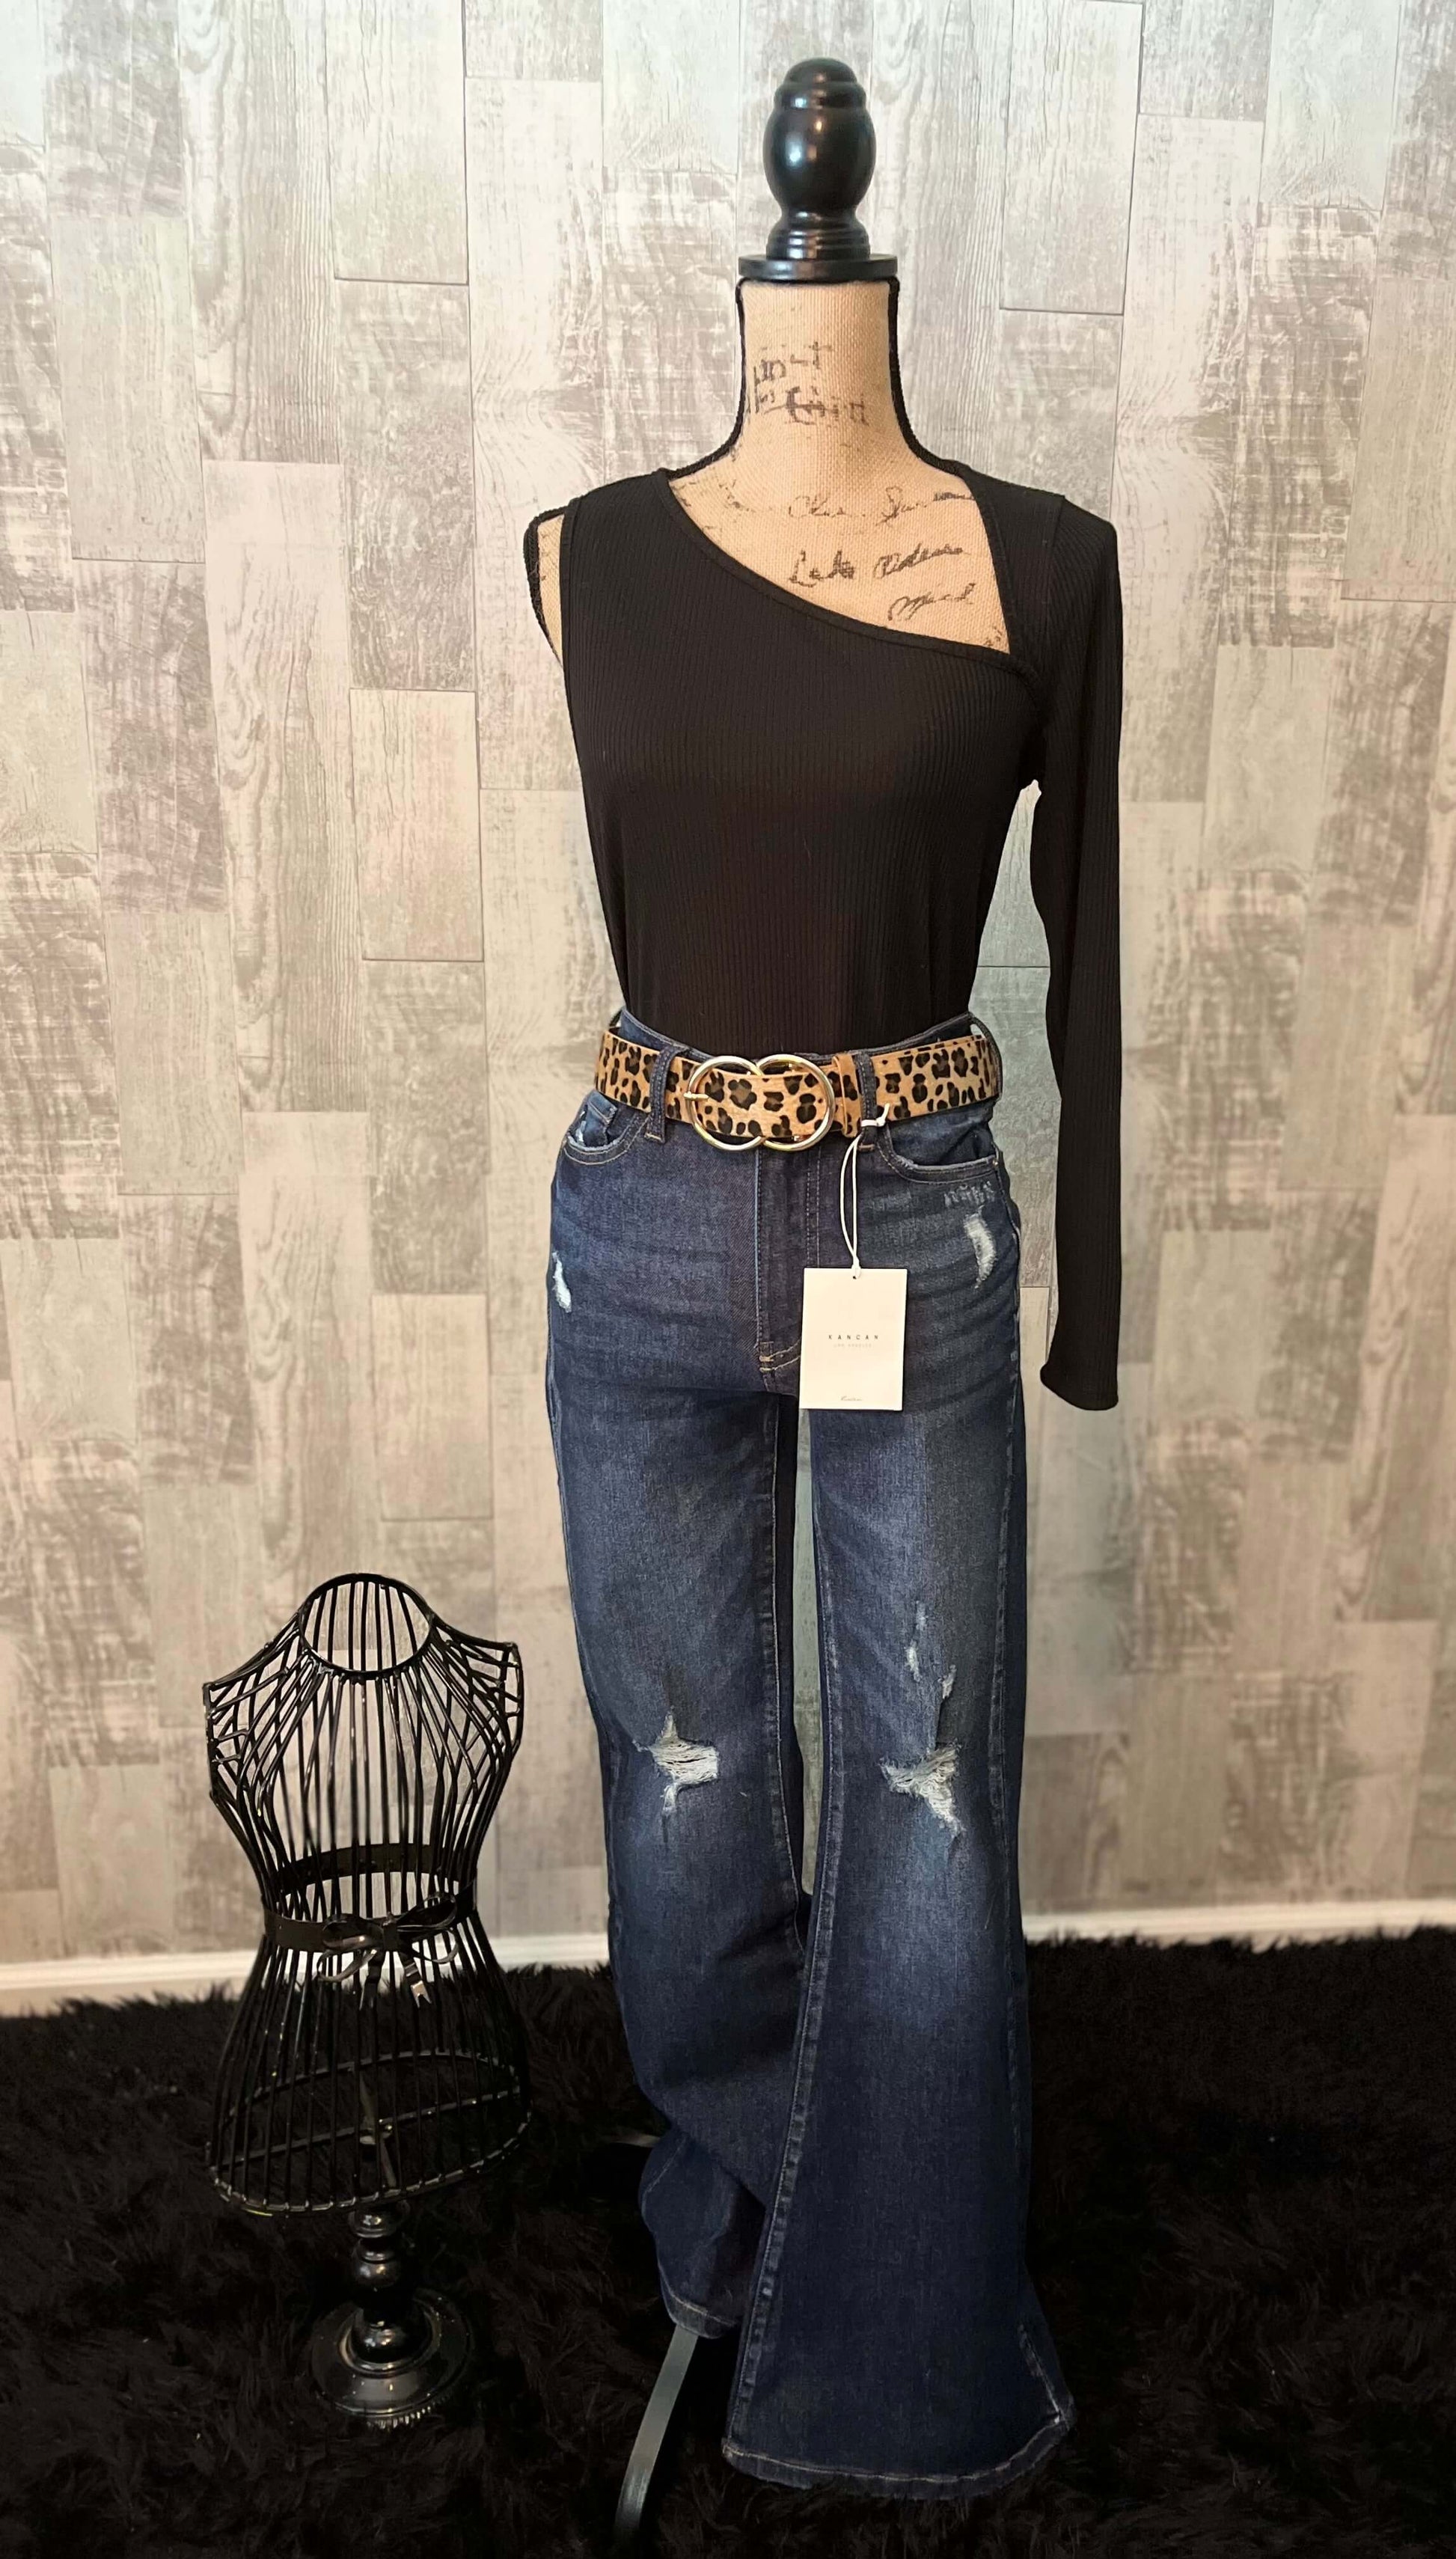 Shirts & Tops BiBi, clothing, cut out, cutout, cutout front, cutout trend, knit, long sleeve, one sleeve, rib knit, shirts, shirts & tops, tops, trendy, trendy fashion Size: Small, Medium, Large, Extra Large